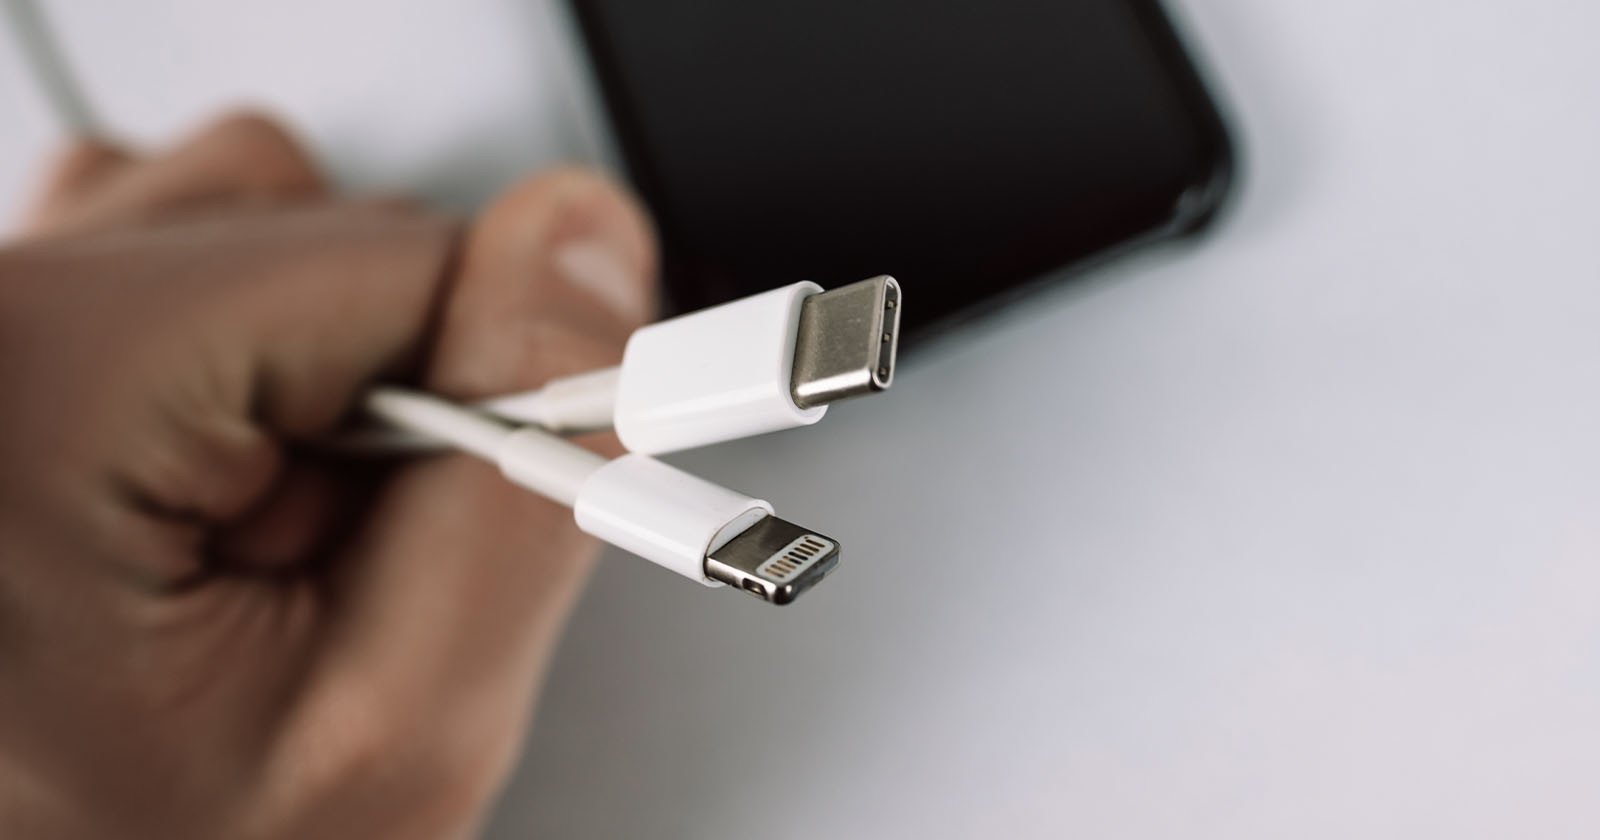  european union says all smartphones must charge 